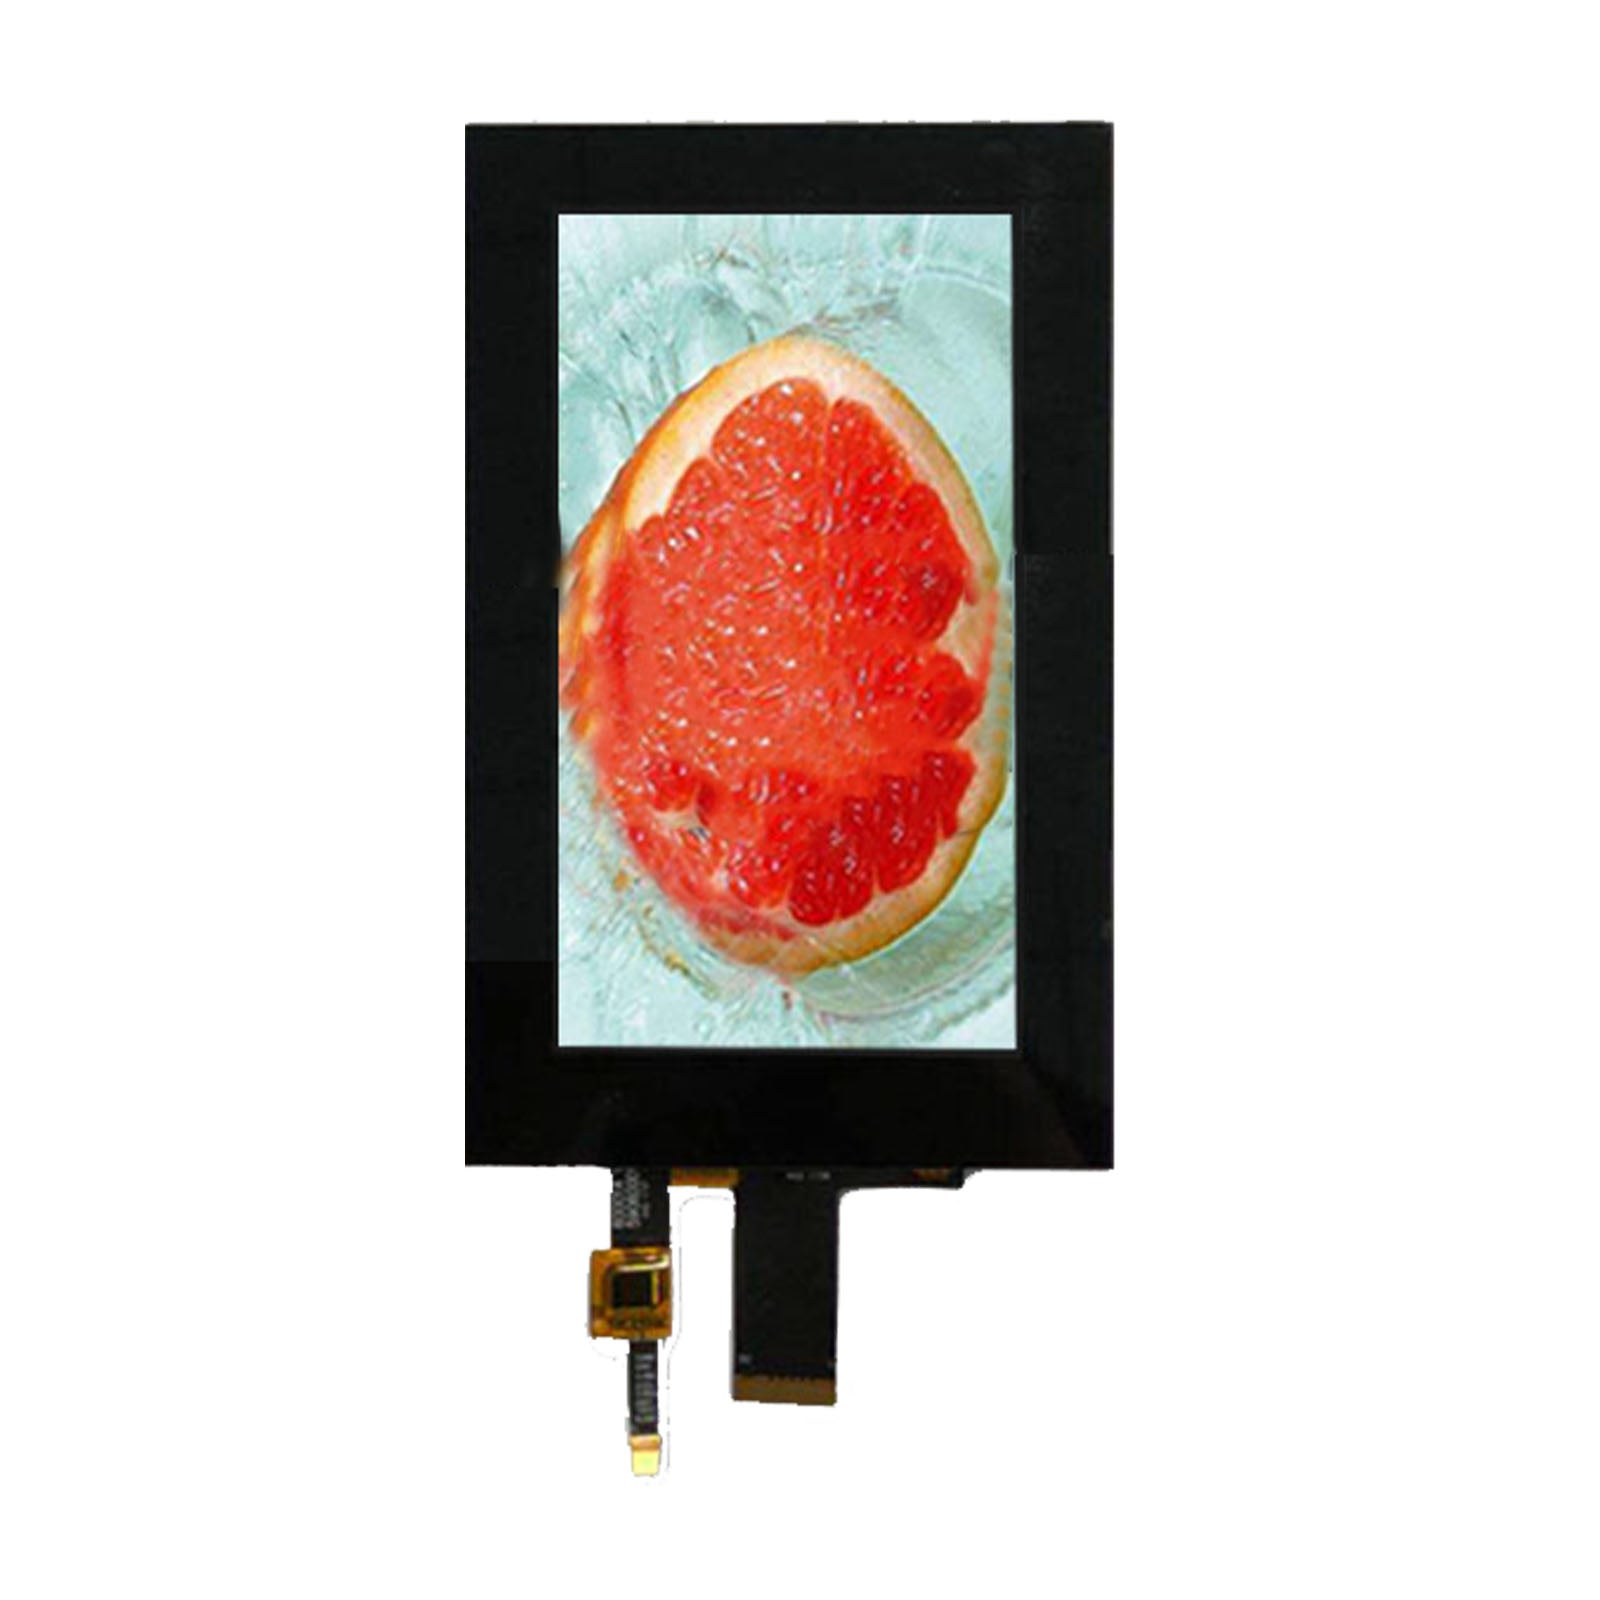 DisplayModule 6.0" IPS 720x1440 Display Panel with Capacitive Touch - MIPI